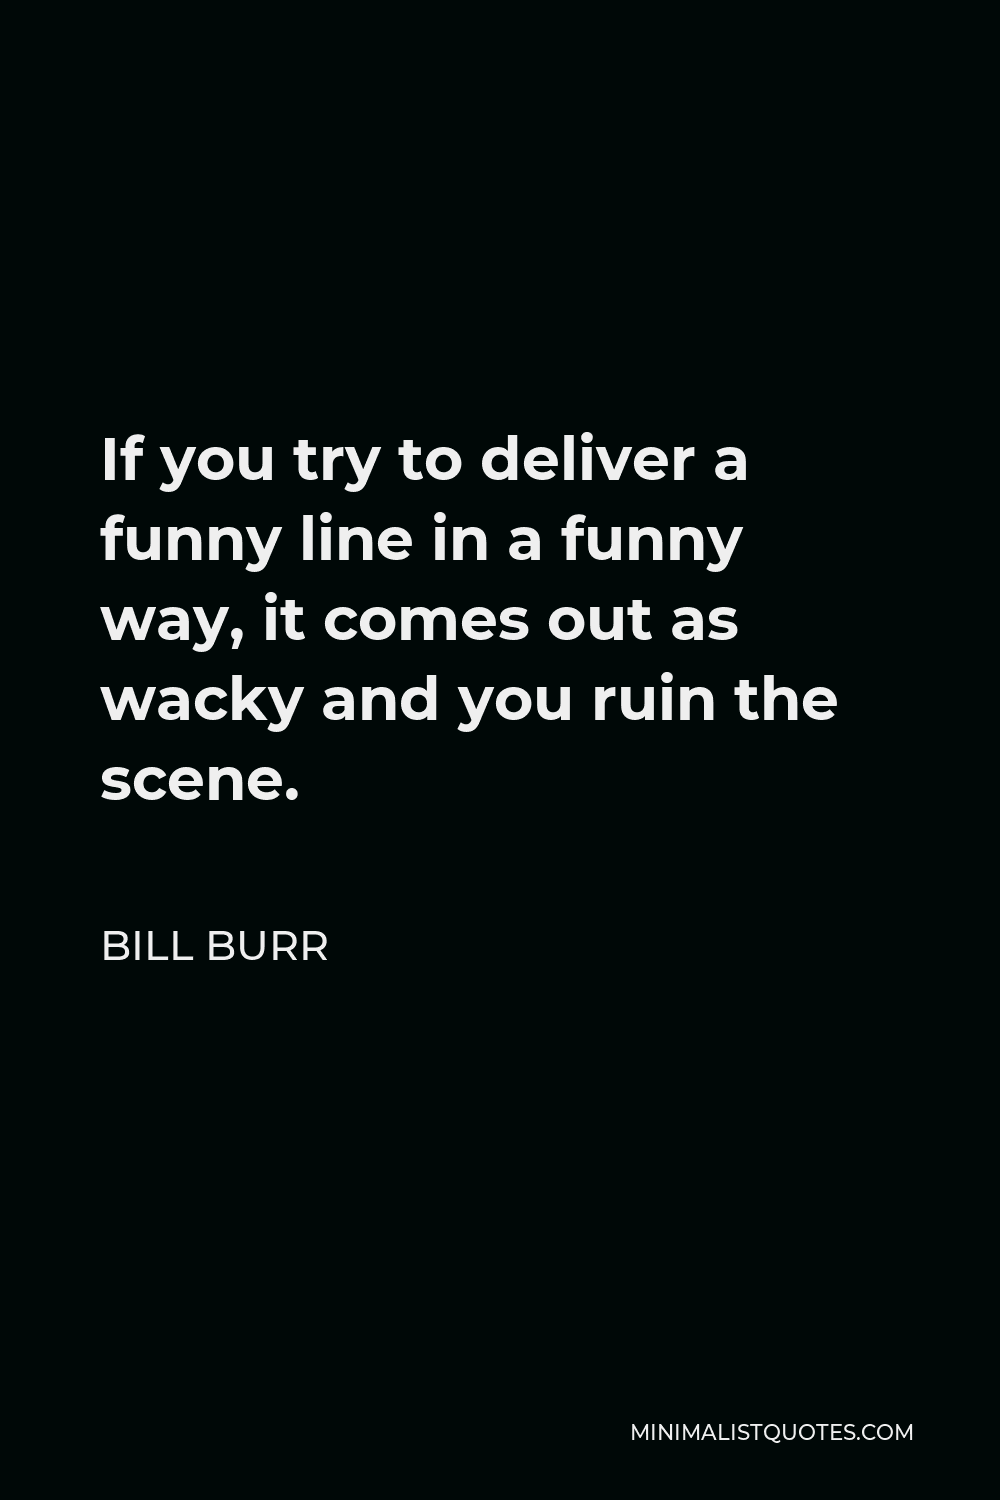 Bill Burr Quote - If you try to deliver a funny line in a funny way, it comes out as wacky and you ruin the scene.